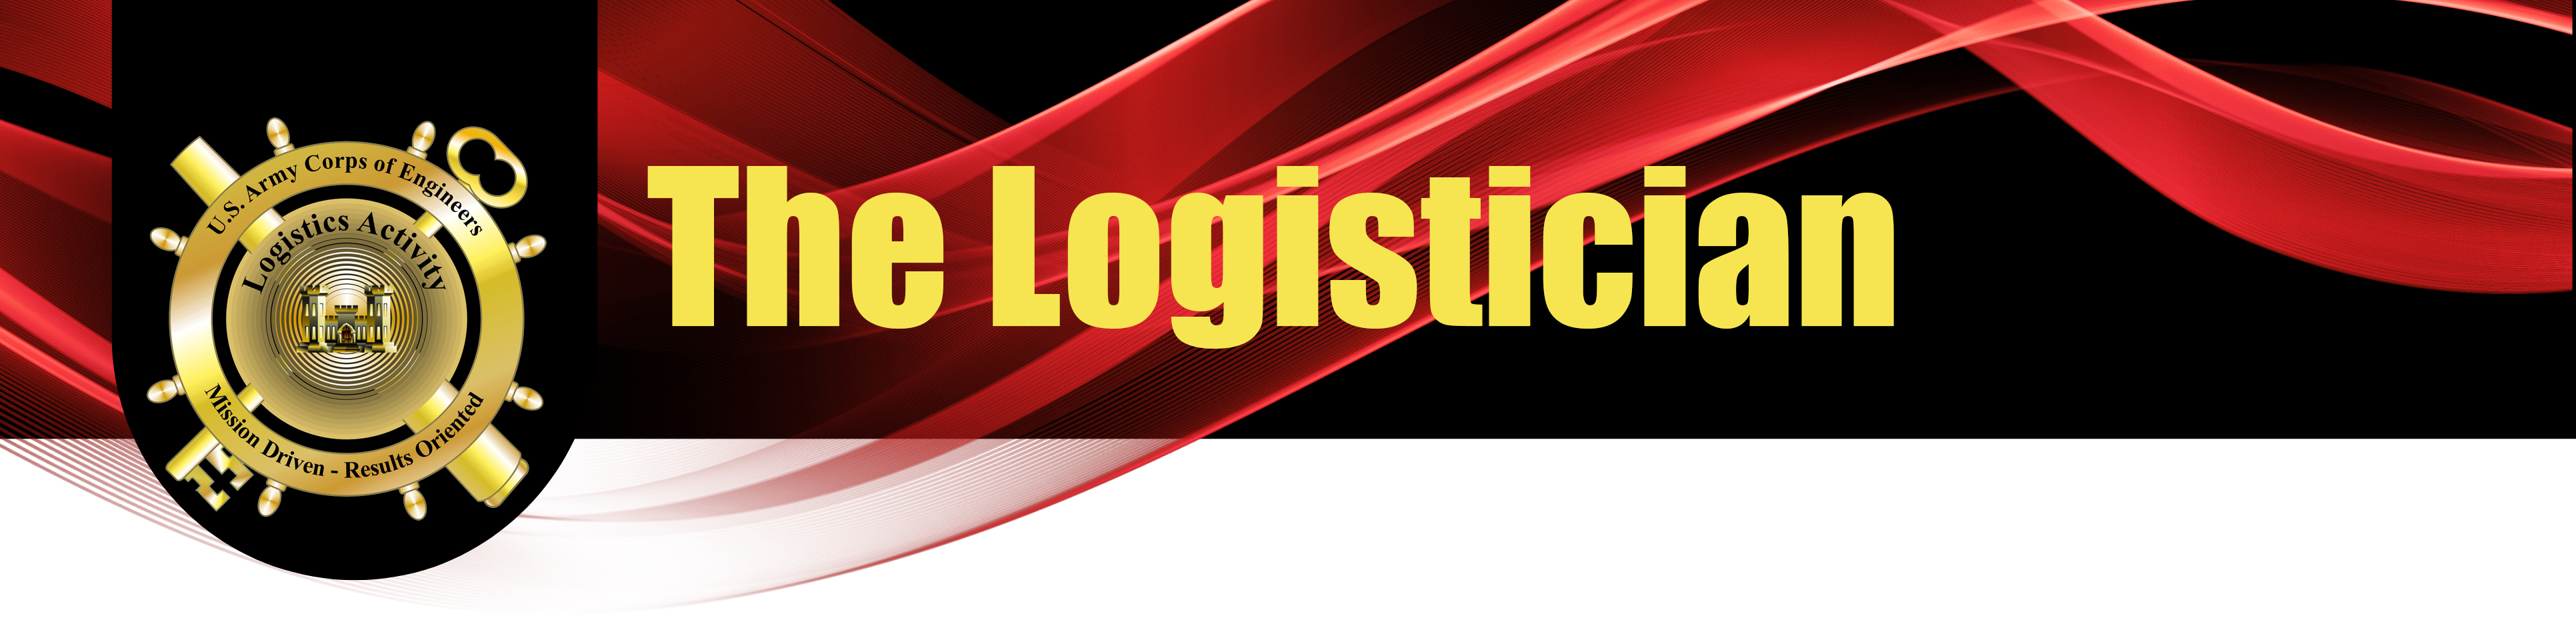 The Logistician